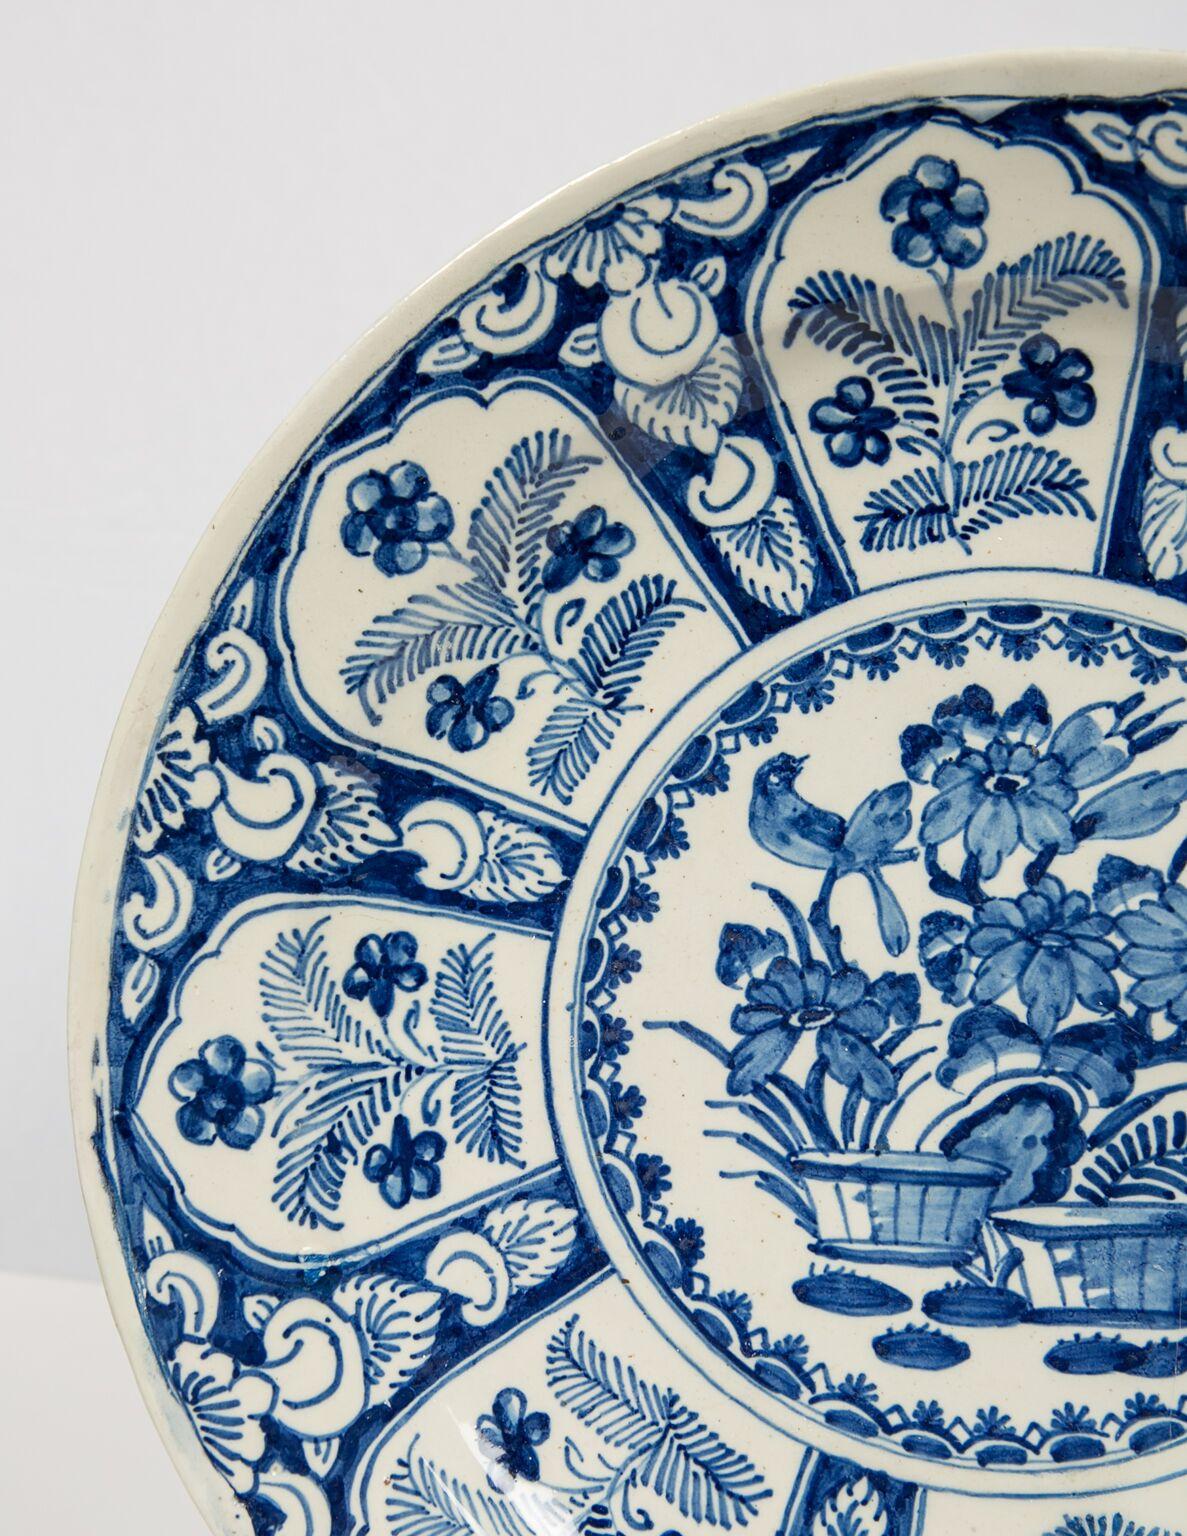 Delft Blue and White Charger Featuring Flowers and a Songbird 18th Century (Handbemalt)